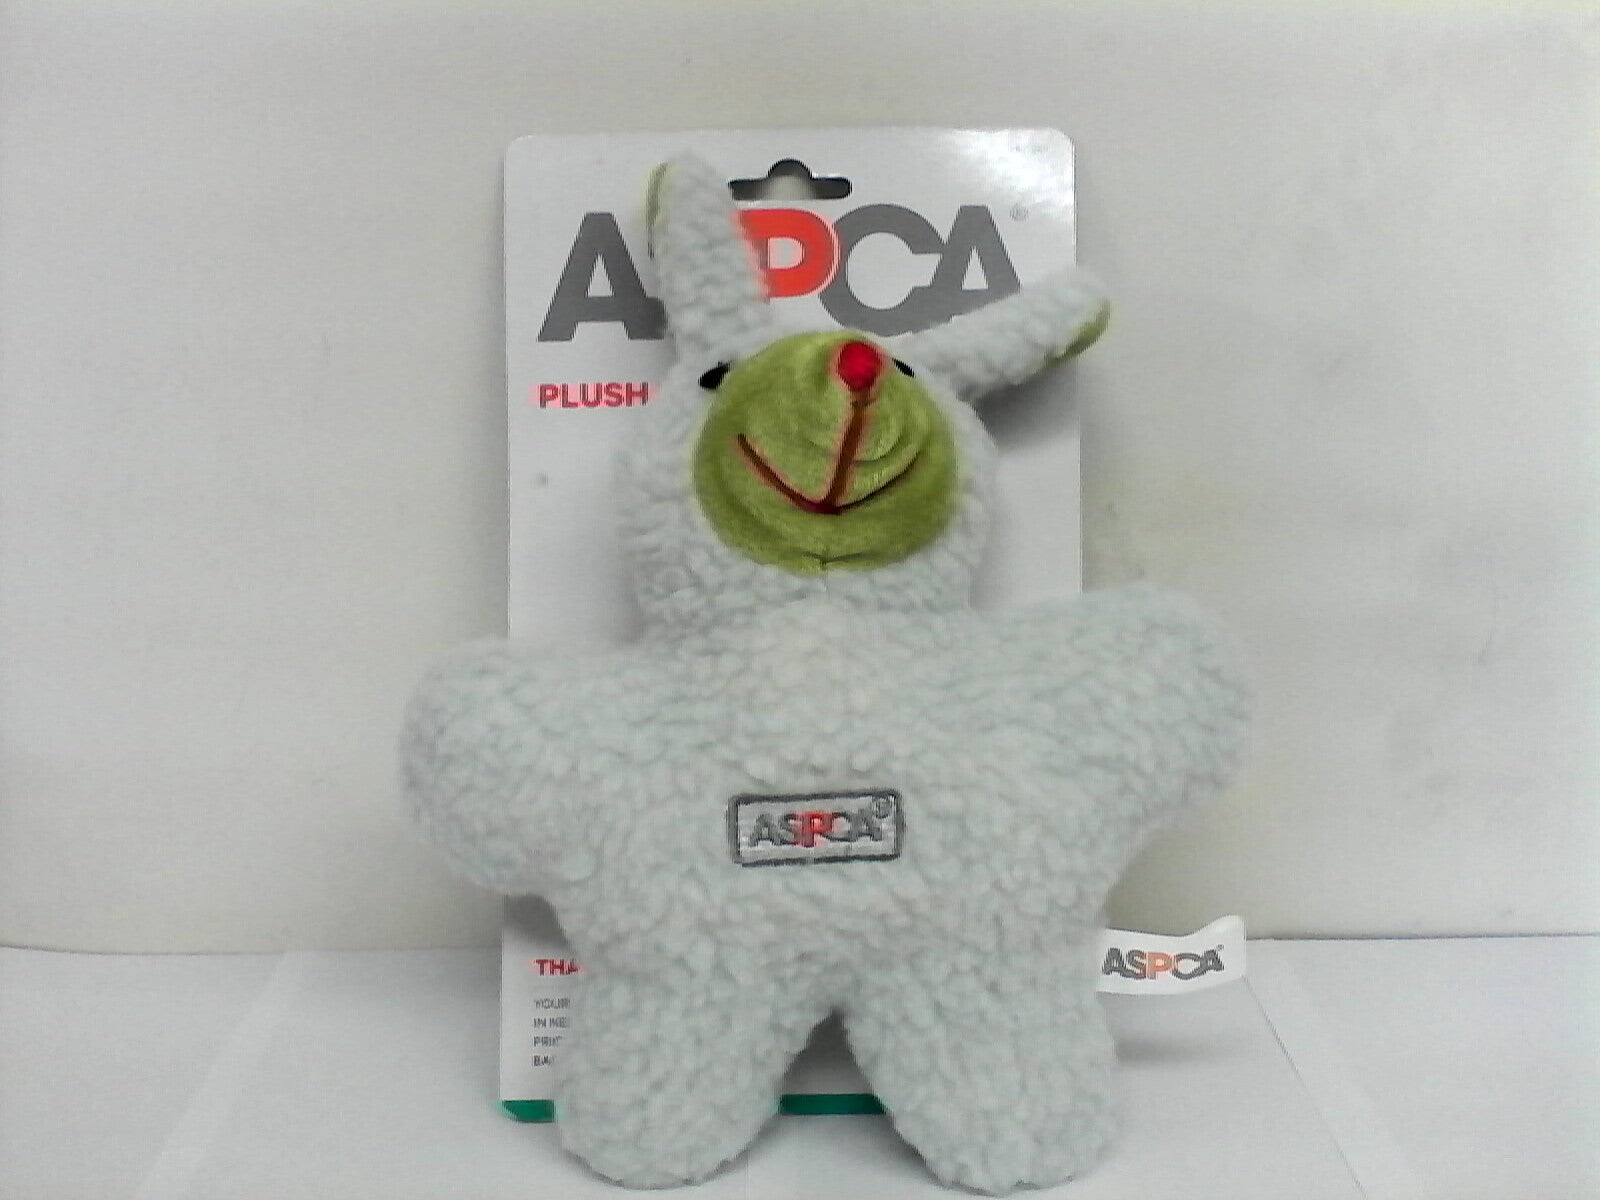 ASPCA Plush Toy with Squeaker (Dog)